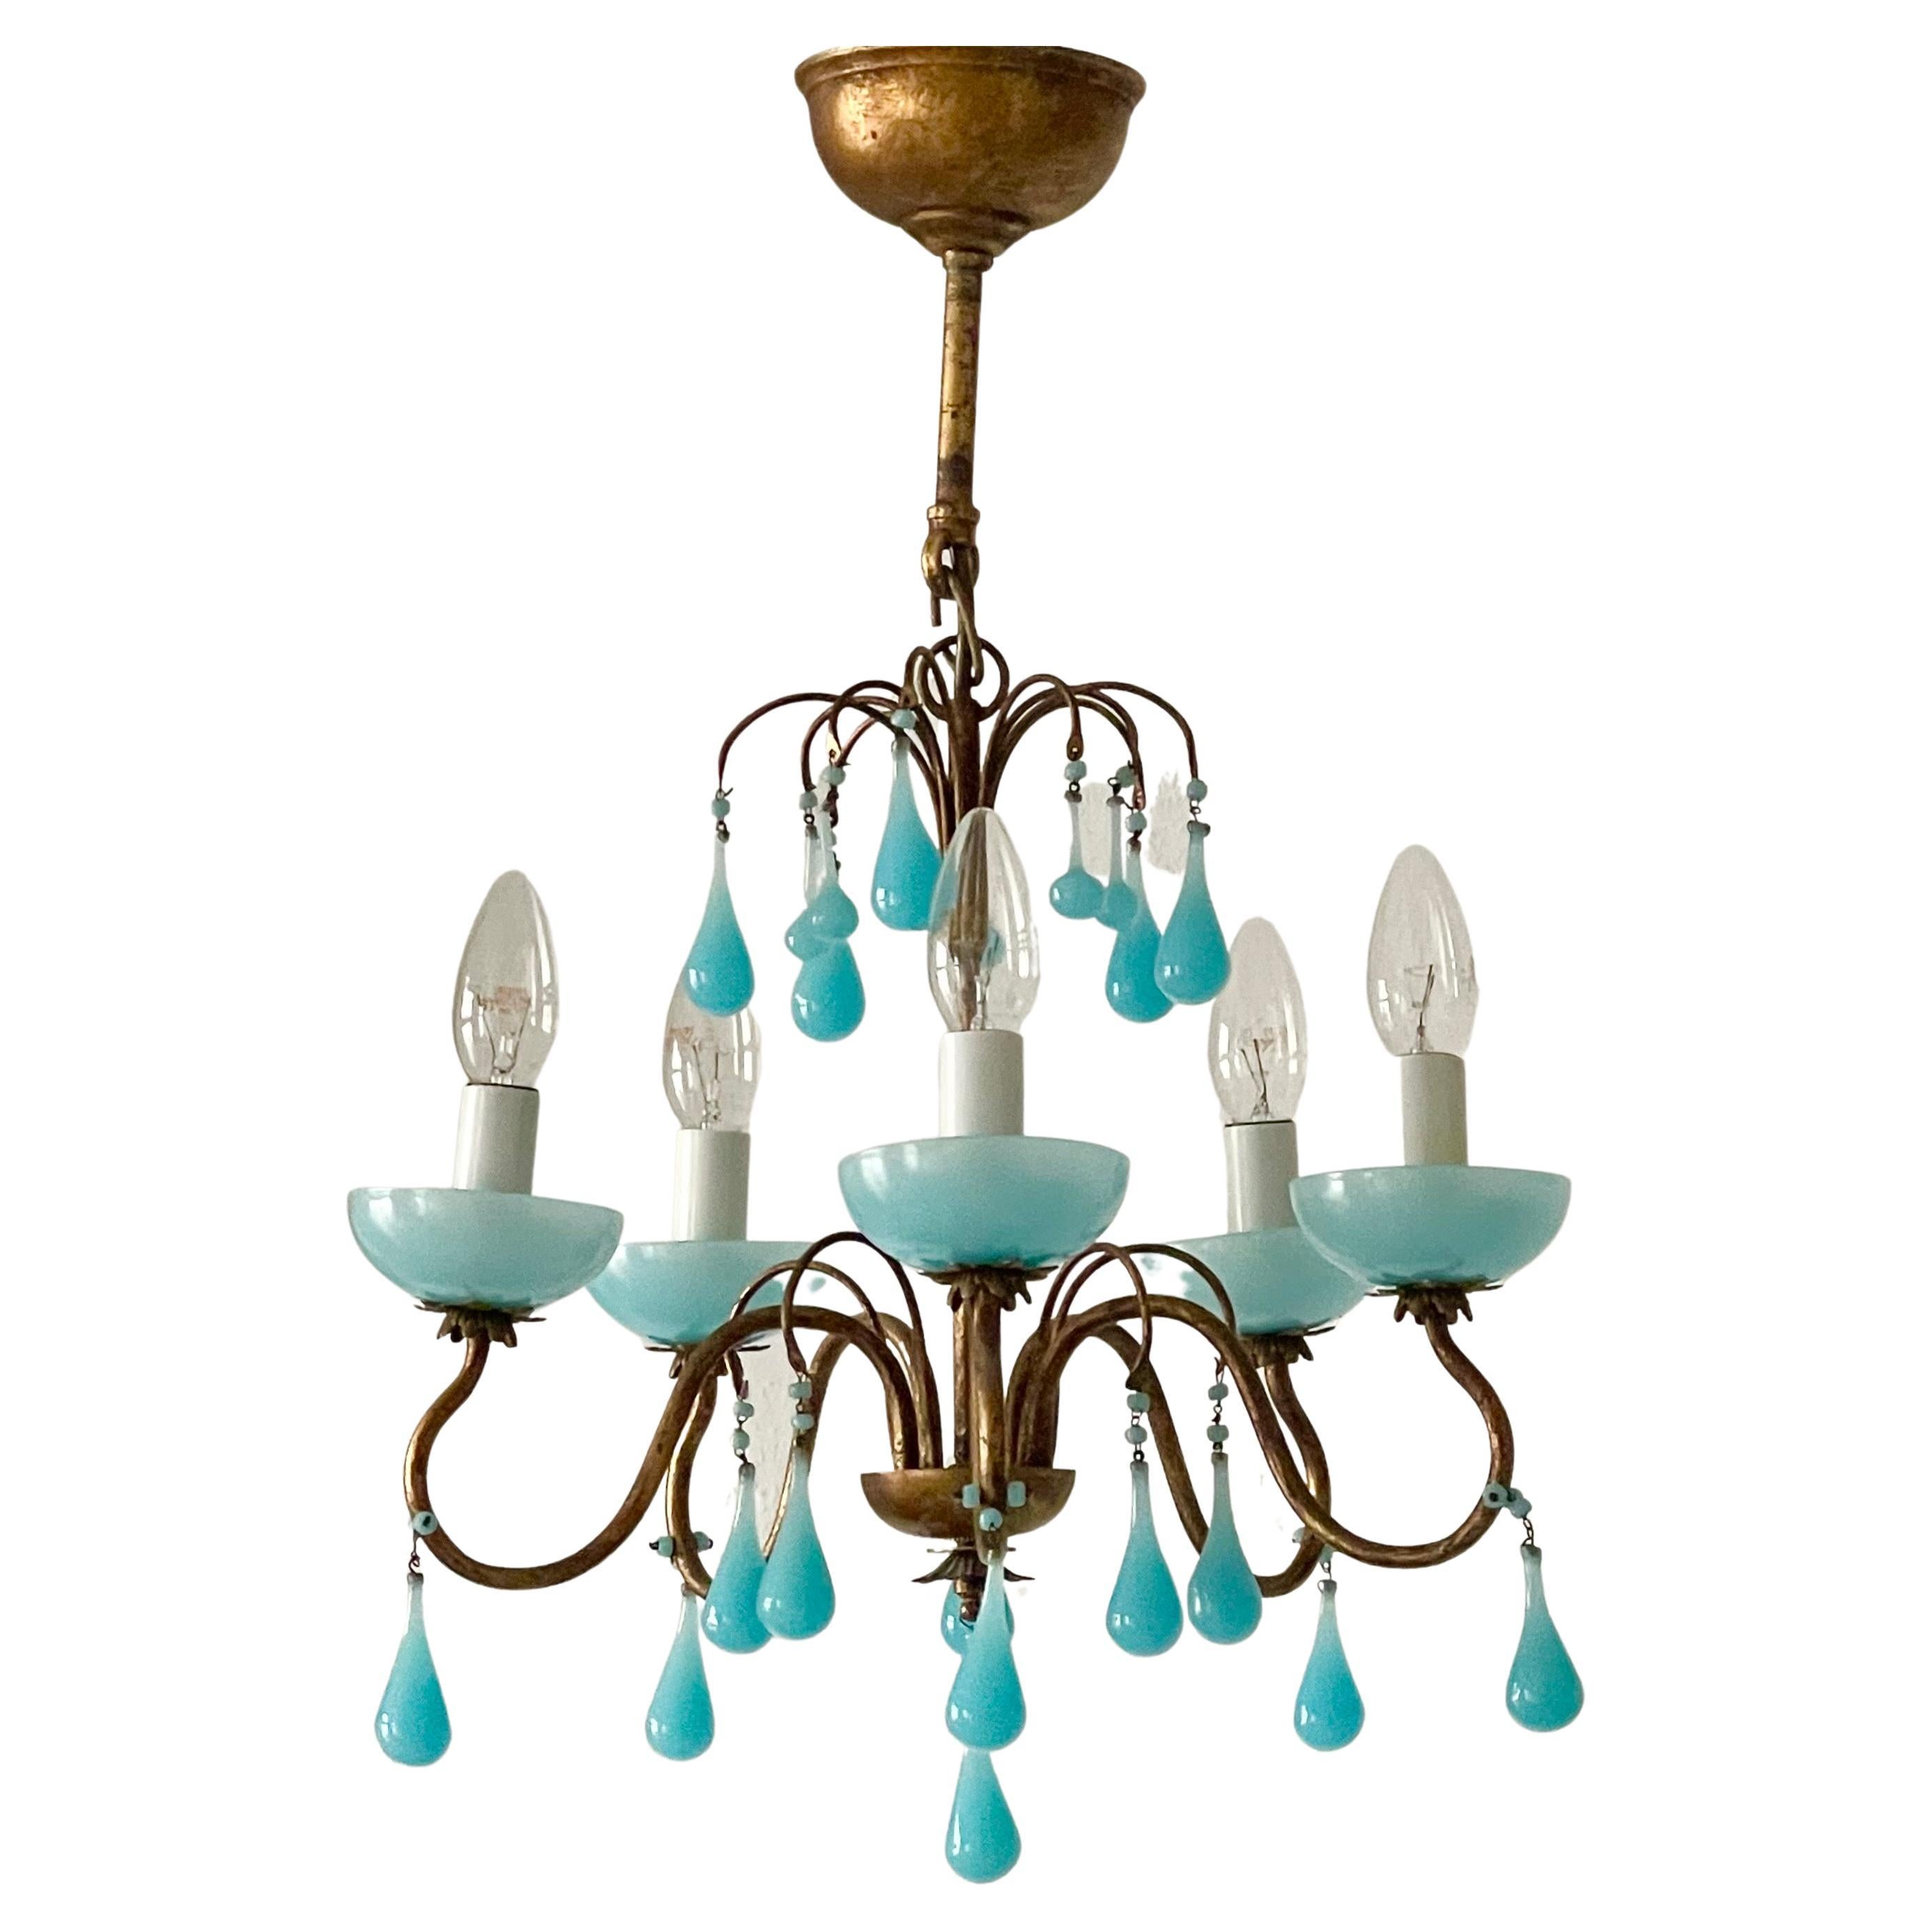 A wonderful aqua opaline blue chandelier, Italy, circa 1930s.
This beautiful handcrafted chandelier is made of patinated metal/iron decorated with aqua opaline blue Murano glass drops.
Socket: e 14 for standard screw bulbs.
Dimensions: H23.22